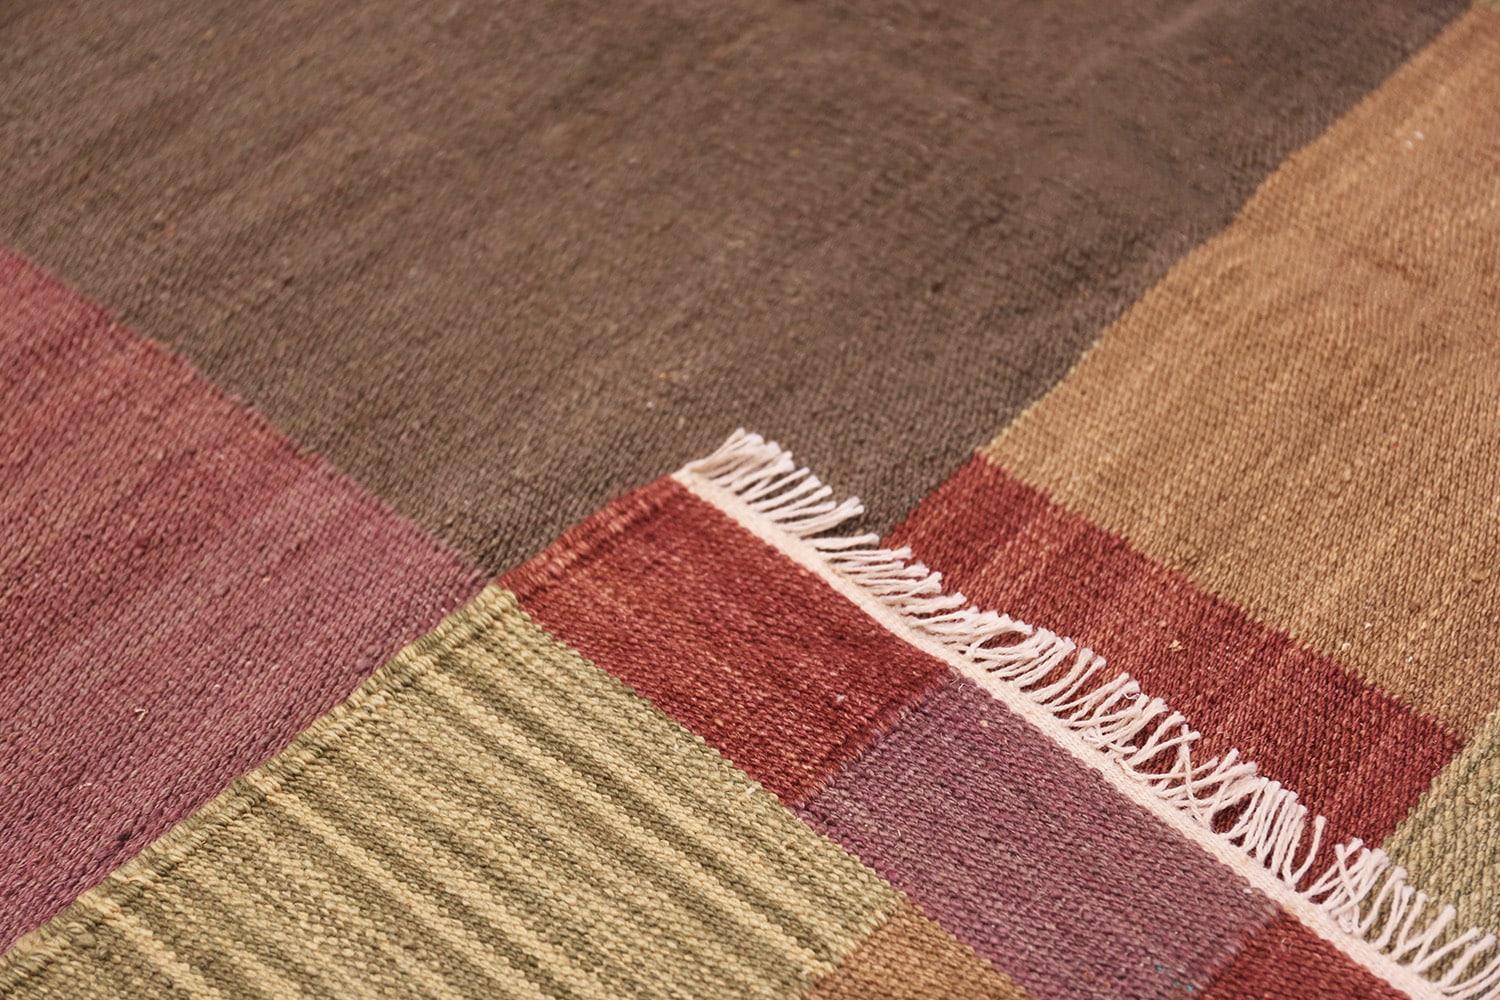 Contemporary Swedish Inspired Modern Kilim Rug. Size: 7 ft x 9 ft 2 in (2.13 m x 2.79 m)